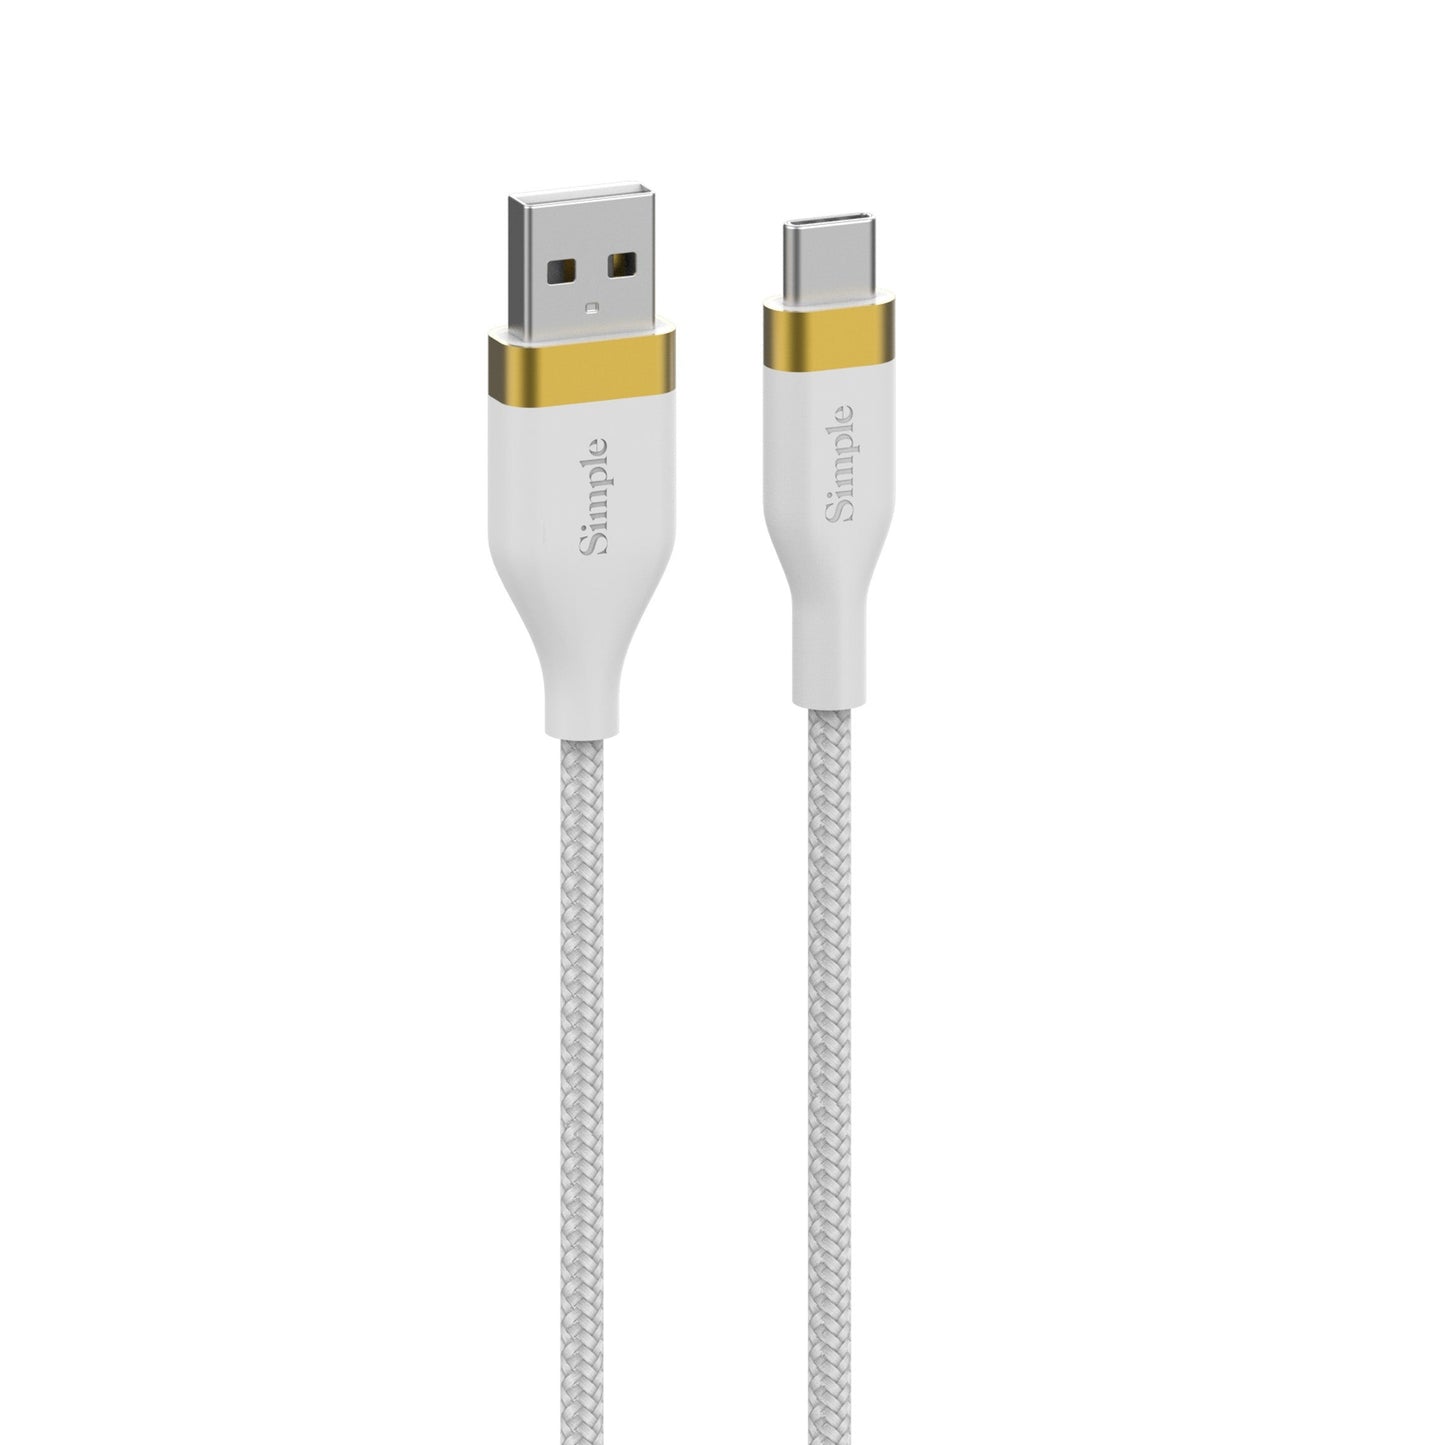 6 Ft - USB-A Cable with USB-C Connector